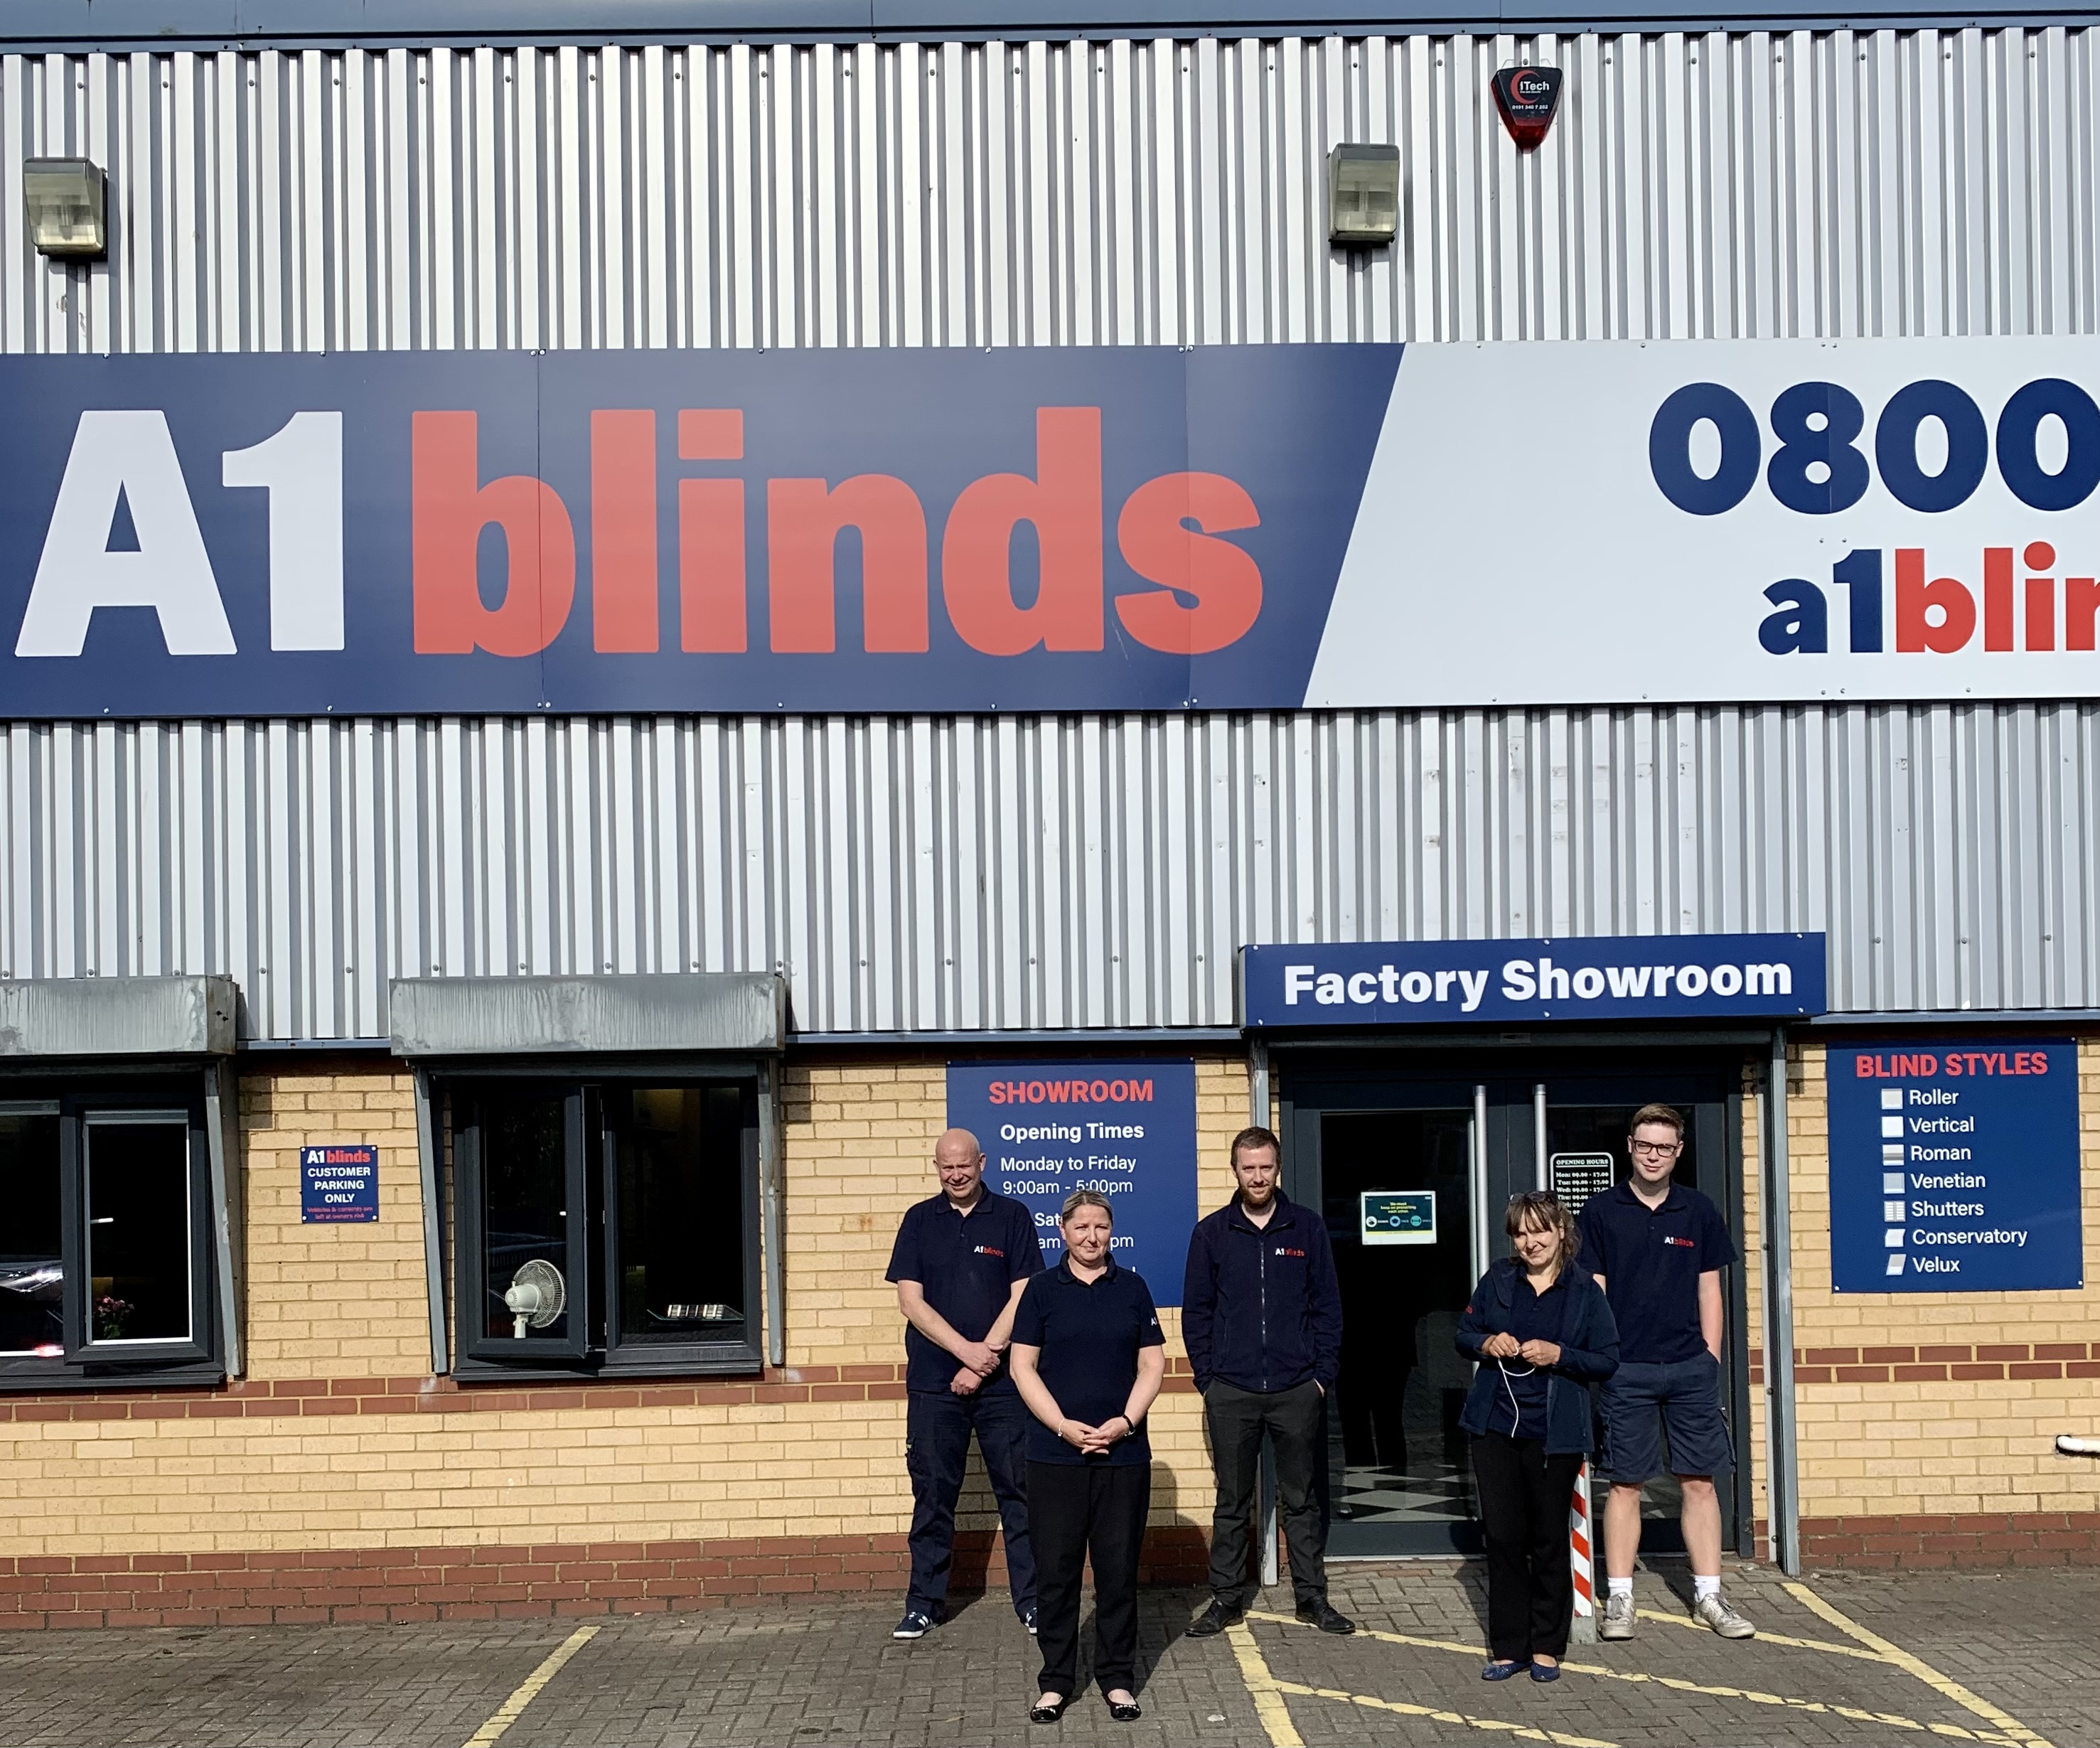 A1 Blinds: Your Local Blind Company - Find an Installer Near You!